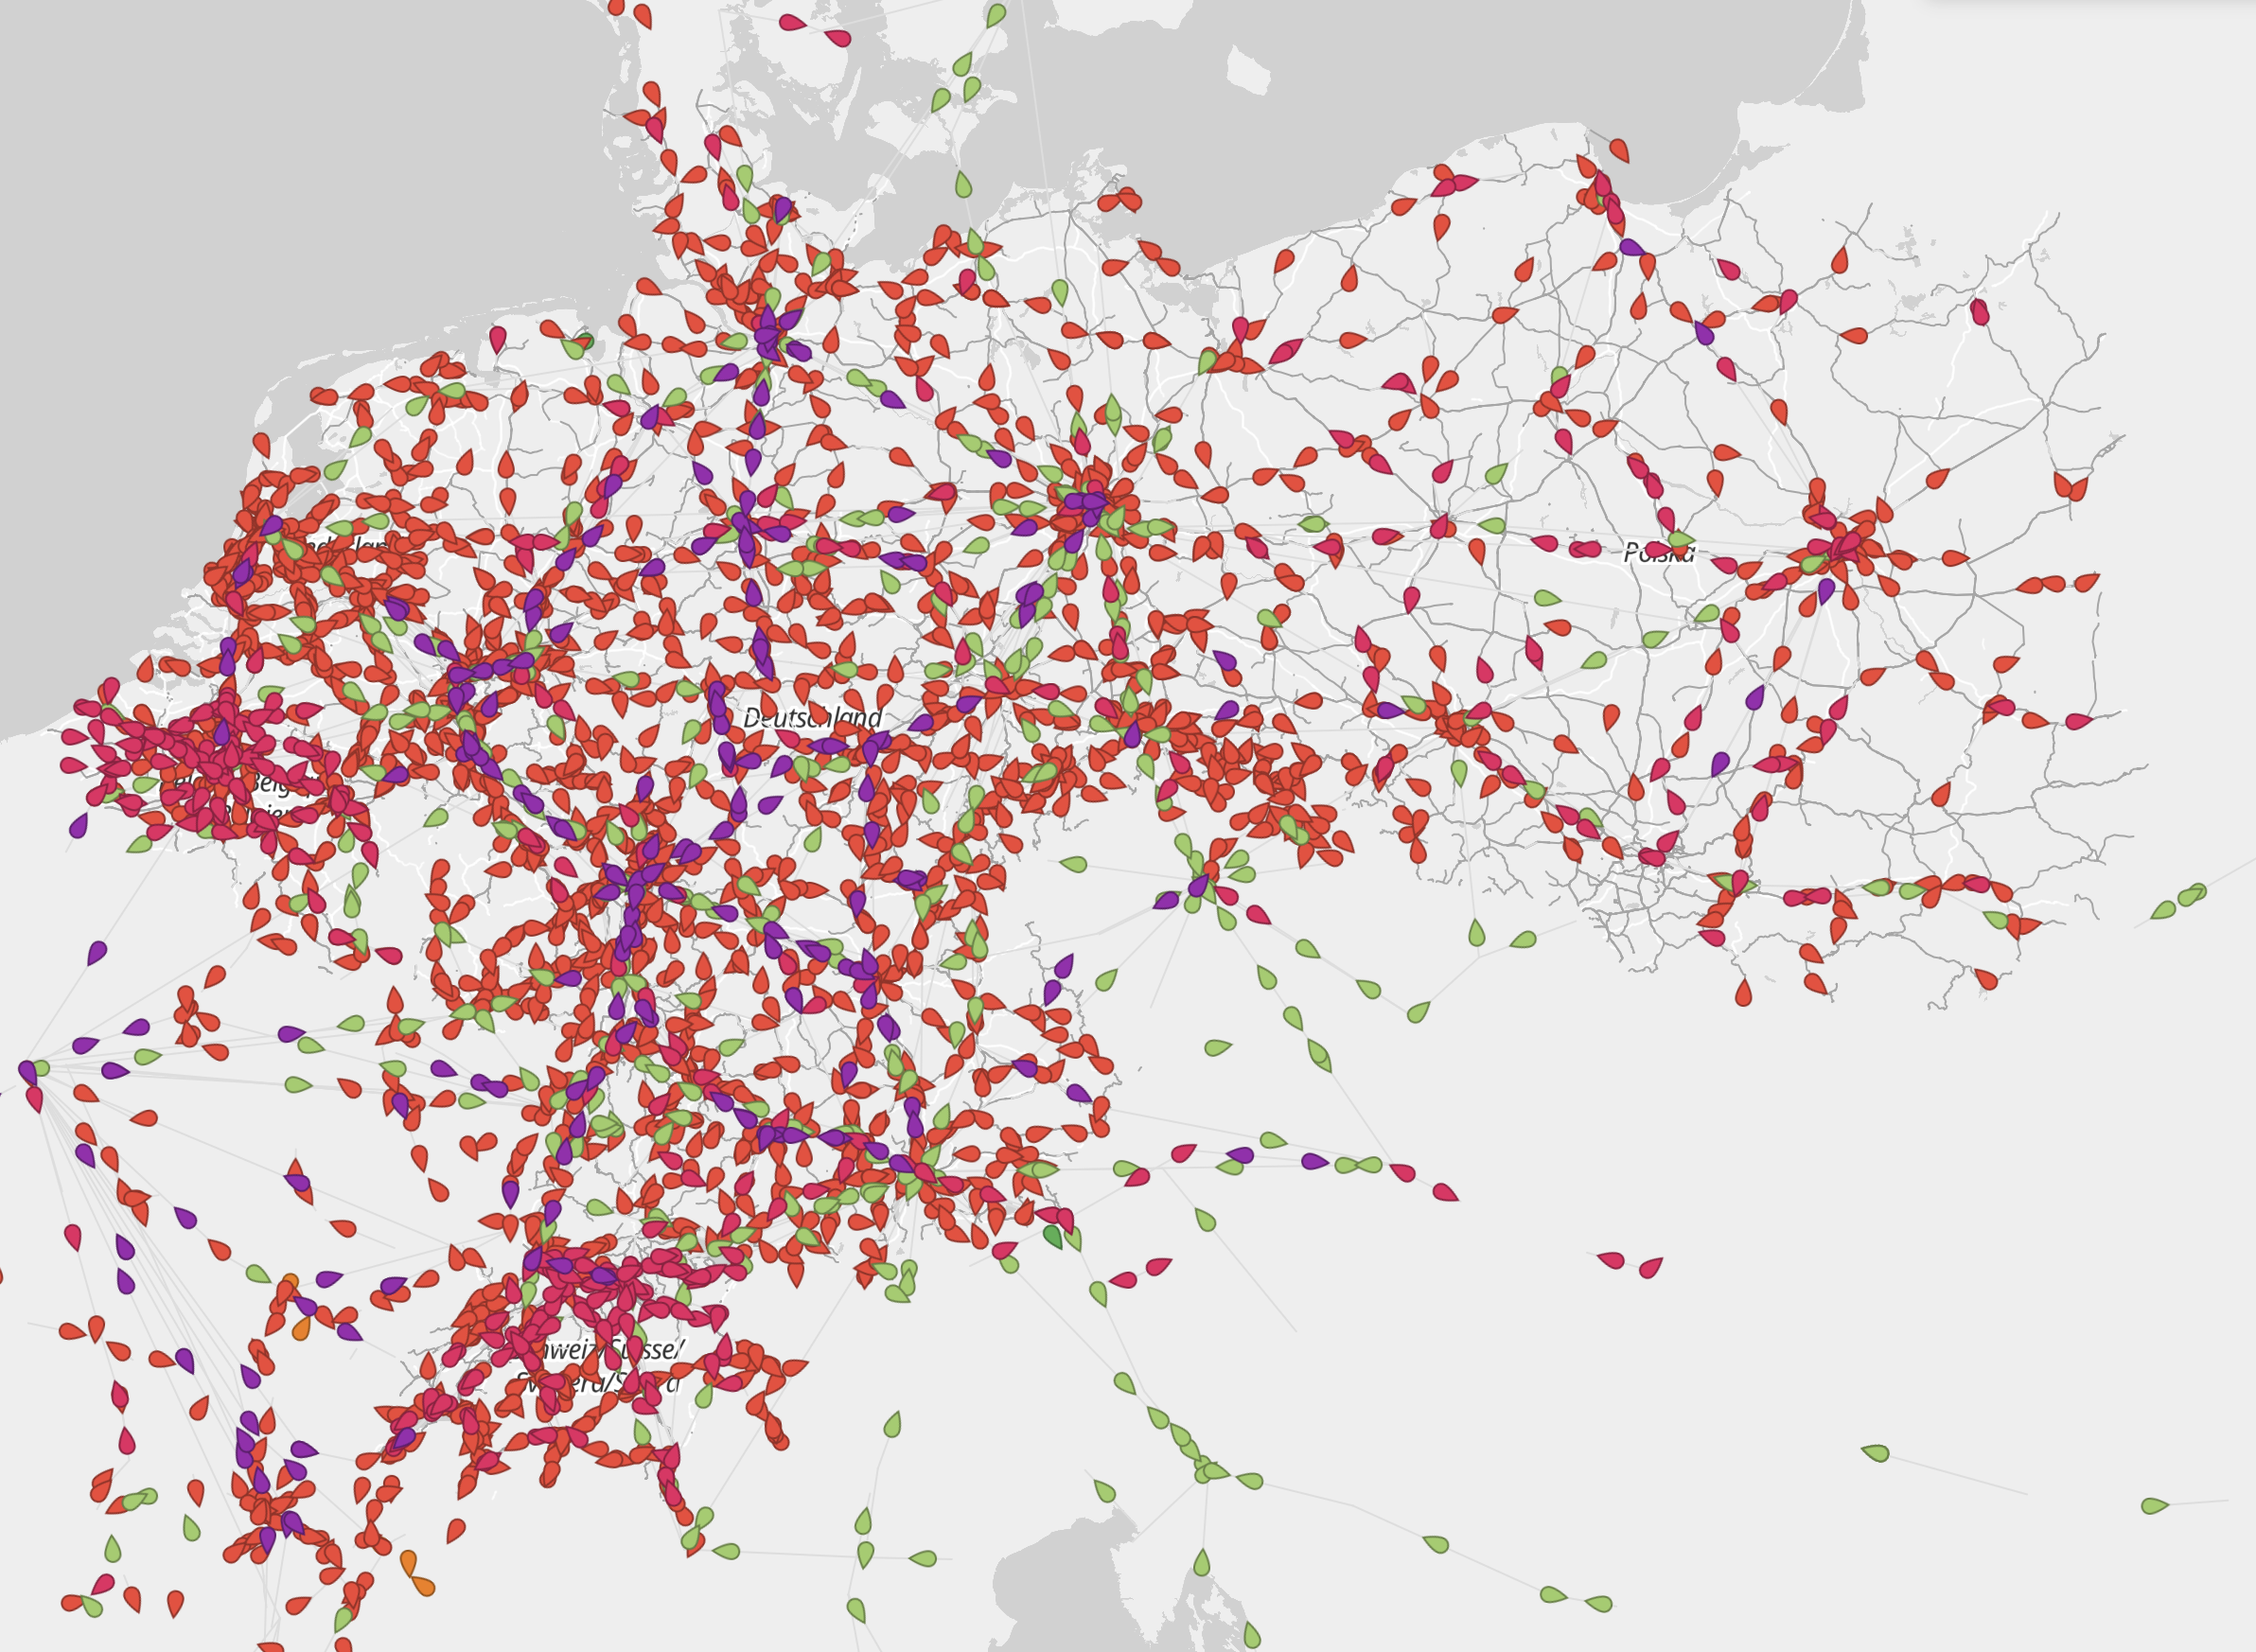 map of Europe with trains in Netherlands, Belgium, Switzerland, Poland, and Germany